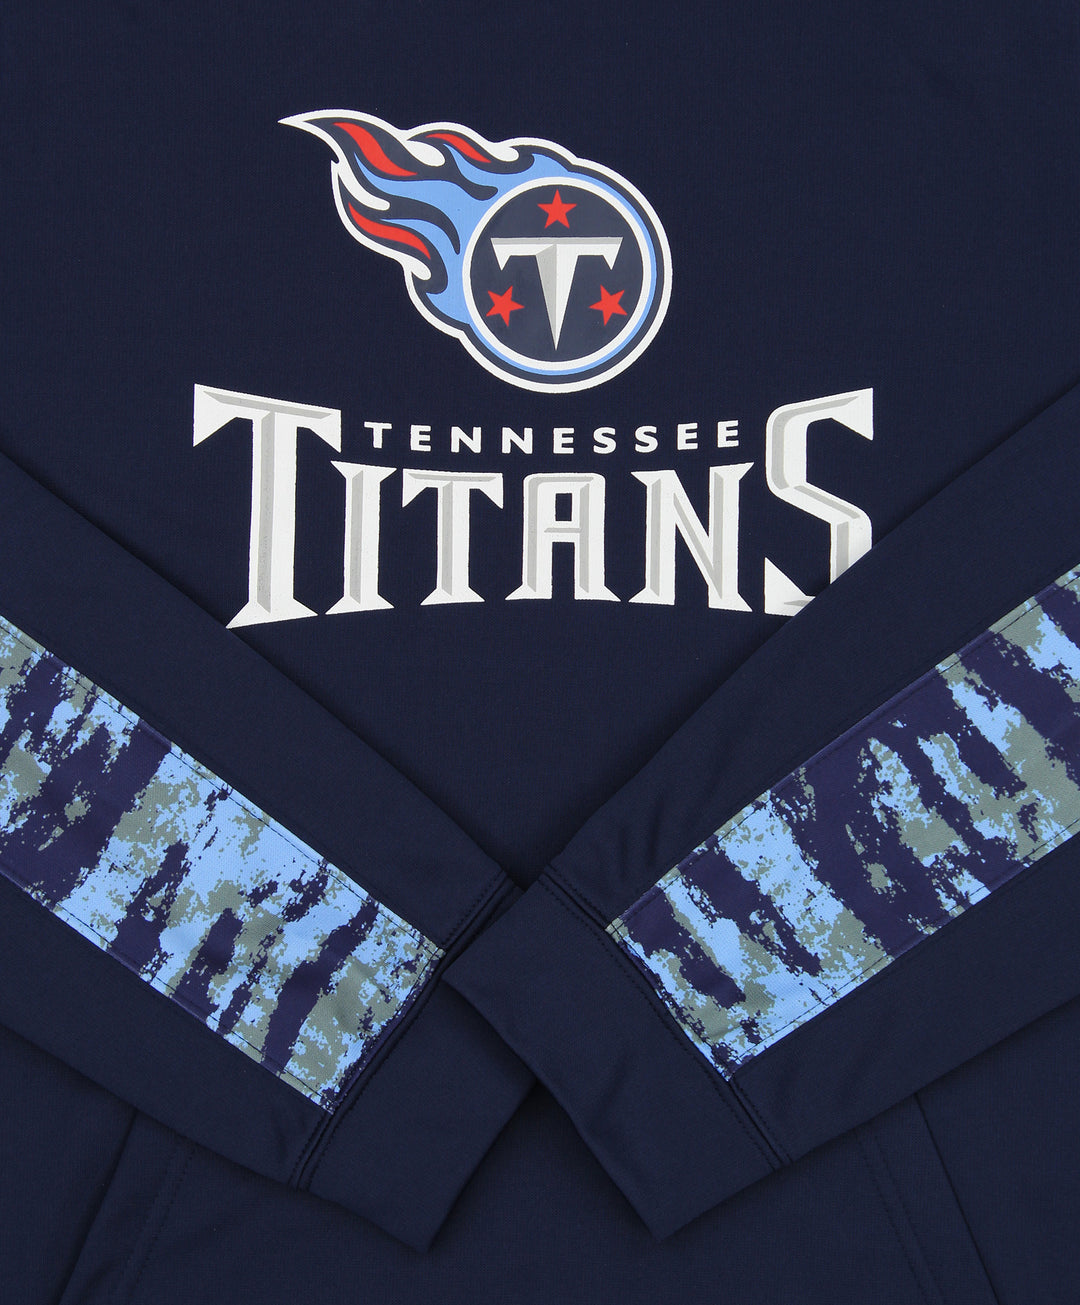 Zubaz NFL Men's Tennessee Titans Performance Hoodie w/ Oxide Sleeves